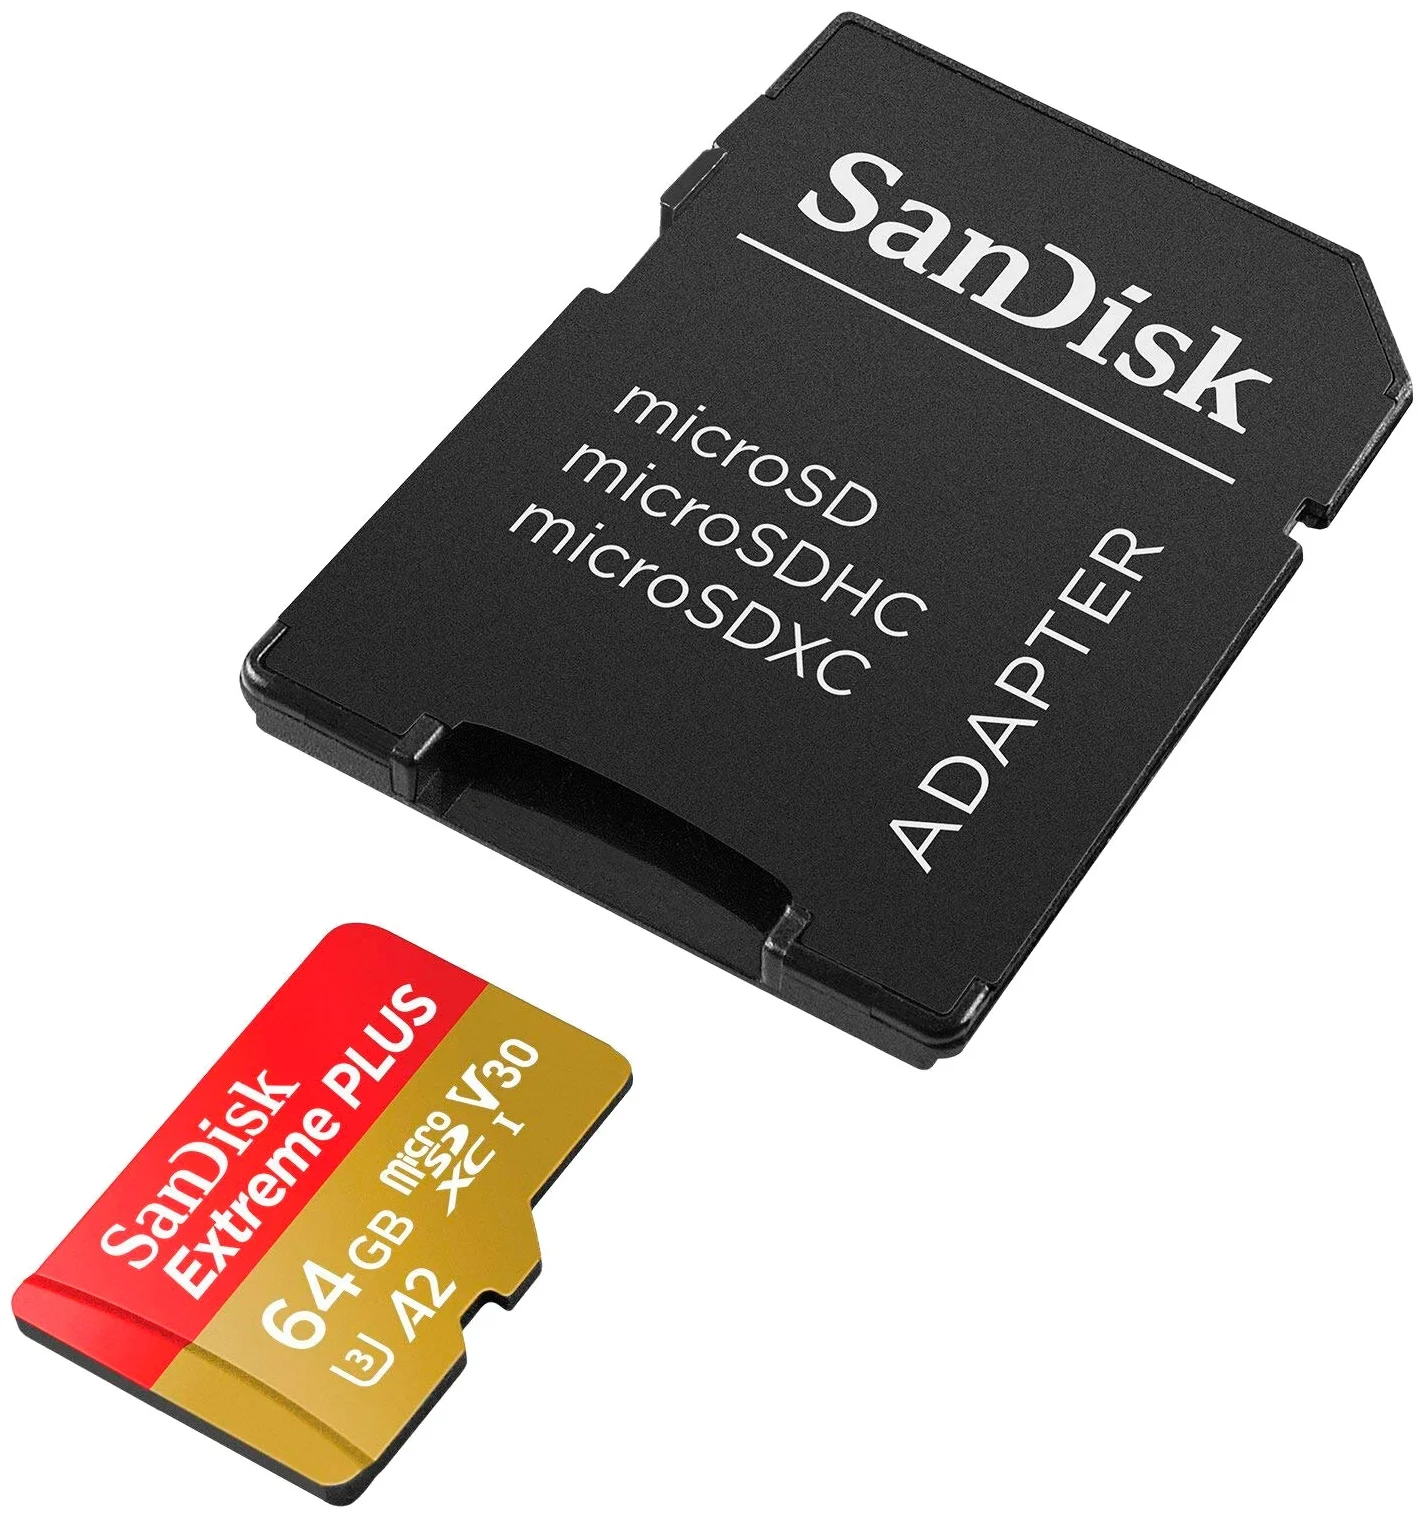 SanDisk Extreme PLUS microSDXC Class 10 UHS Class 3 V30 A2 170MB/s + SD adapter - класс скорости: Class 10